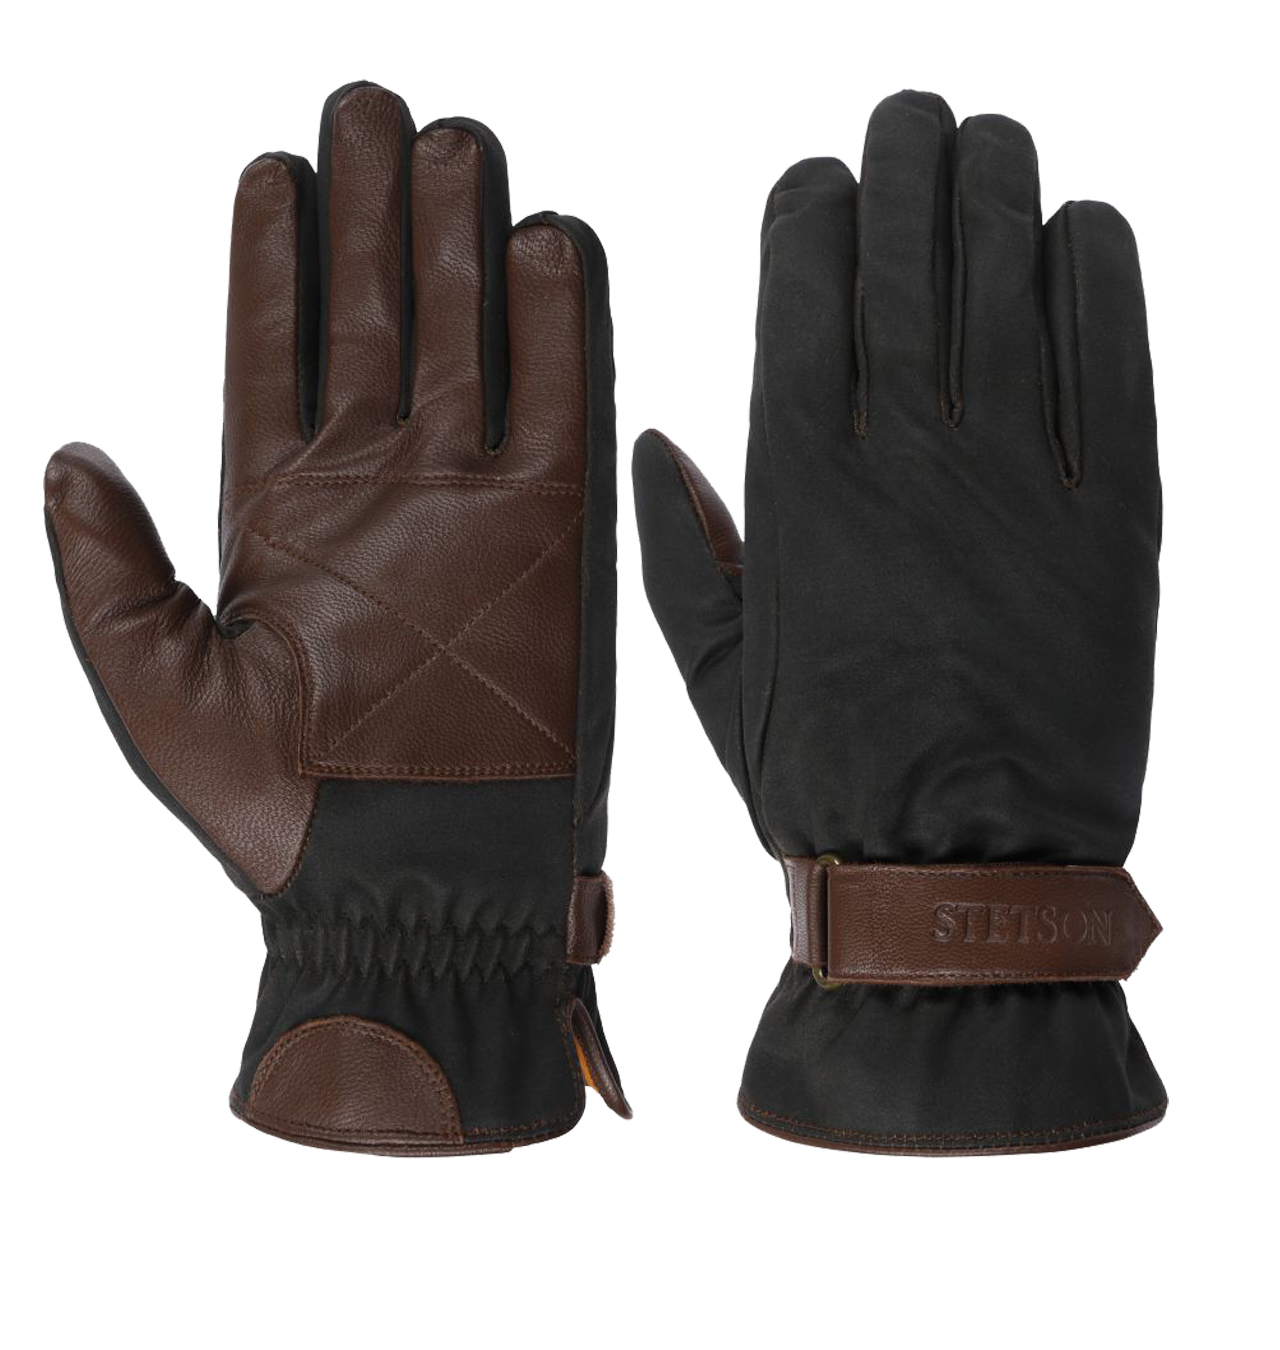 Stetson---Two-tone-Goat-Nappa-Leather-Gloves---Dark-Brown1